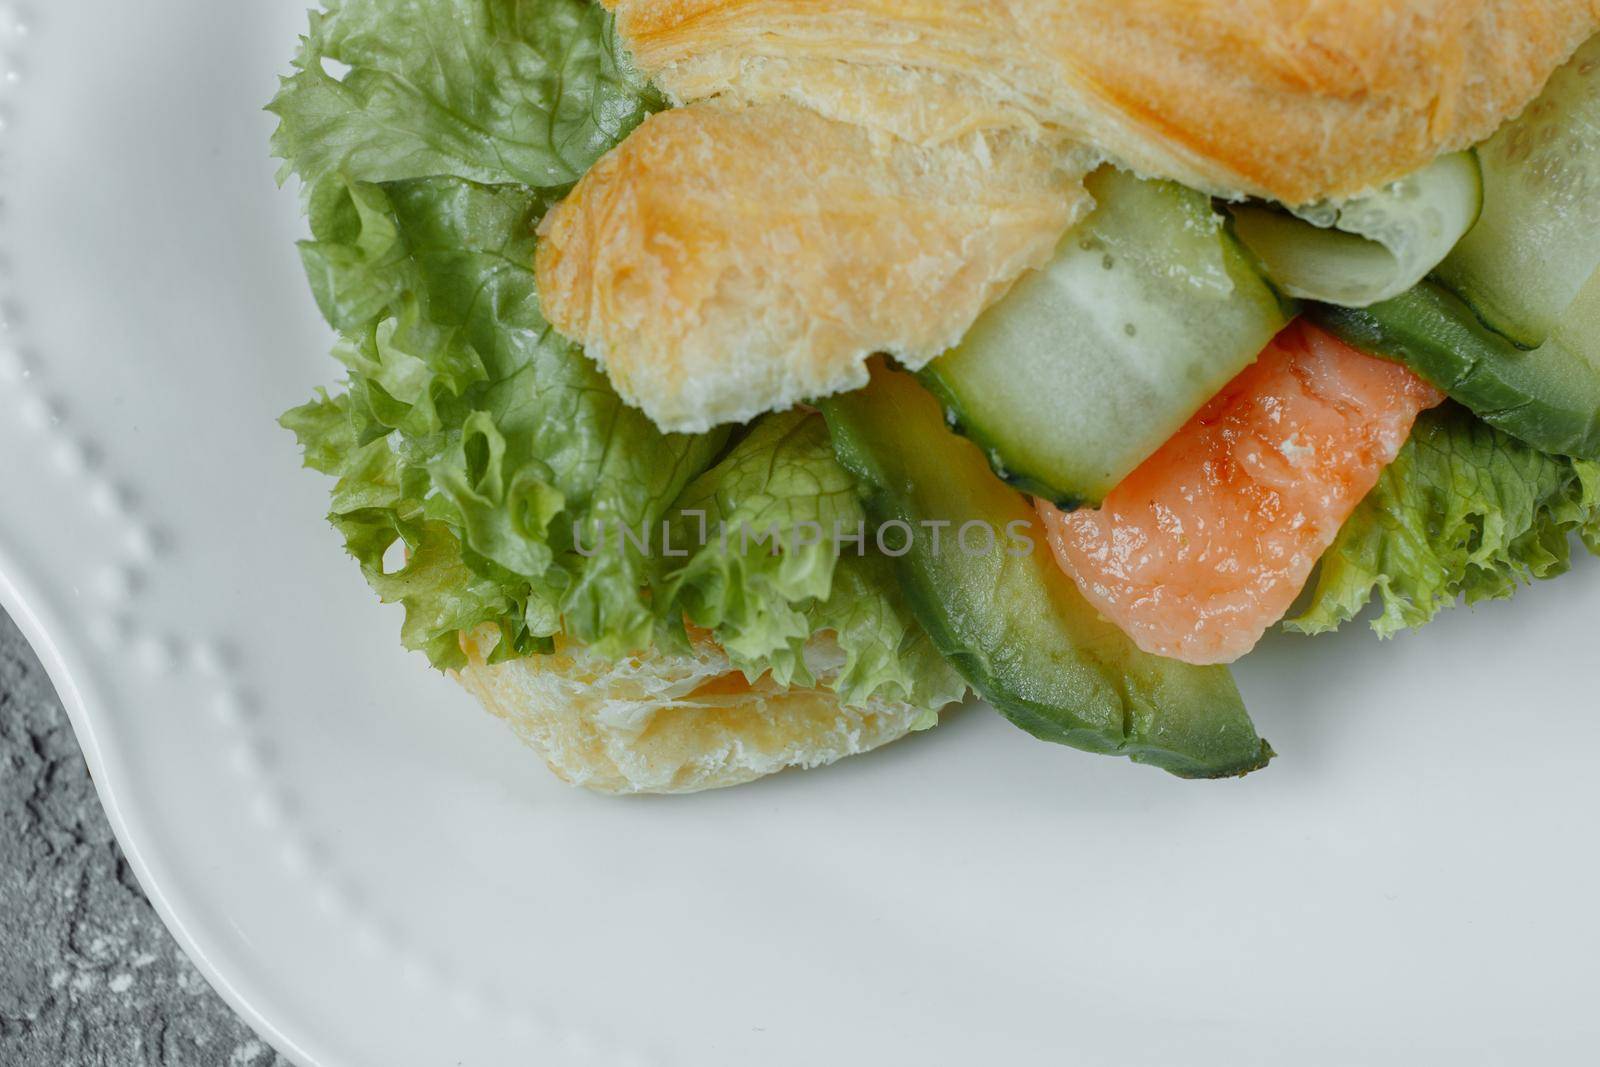 Croissant sandwich with red fish, avocado, fresh vegetables and arugula on black shale board over black stone background. Healthy food concept.